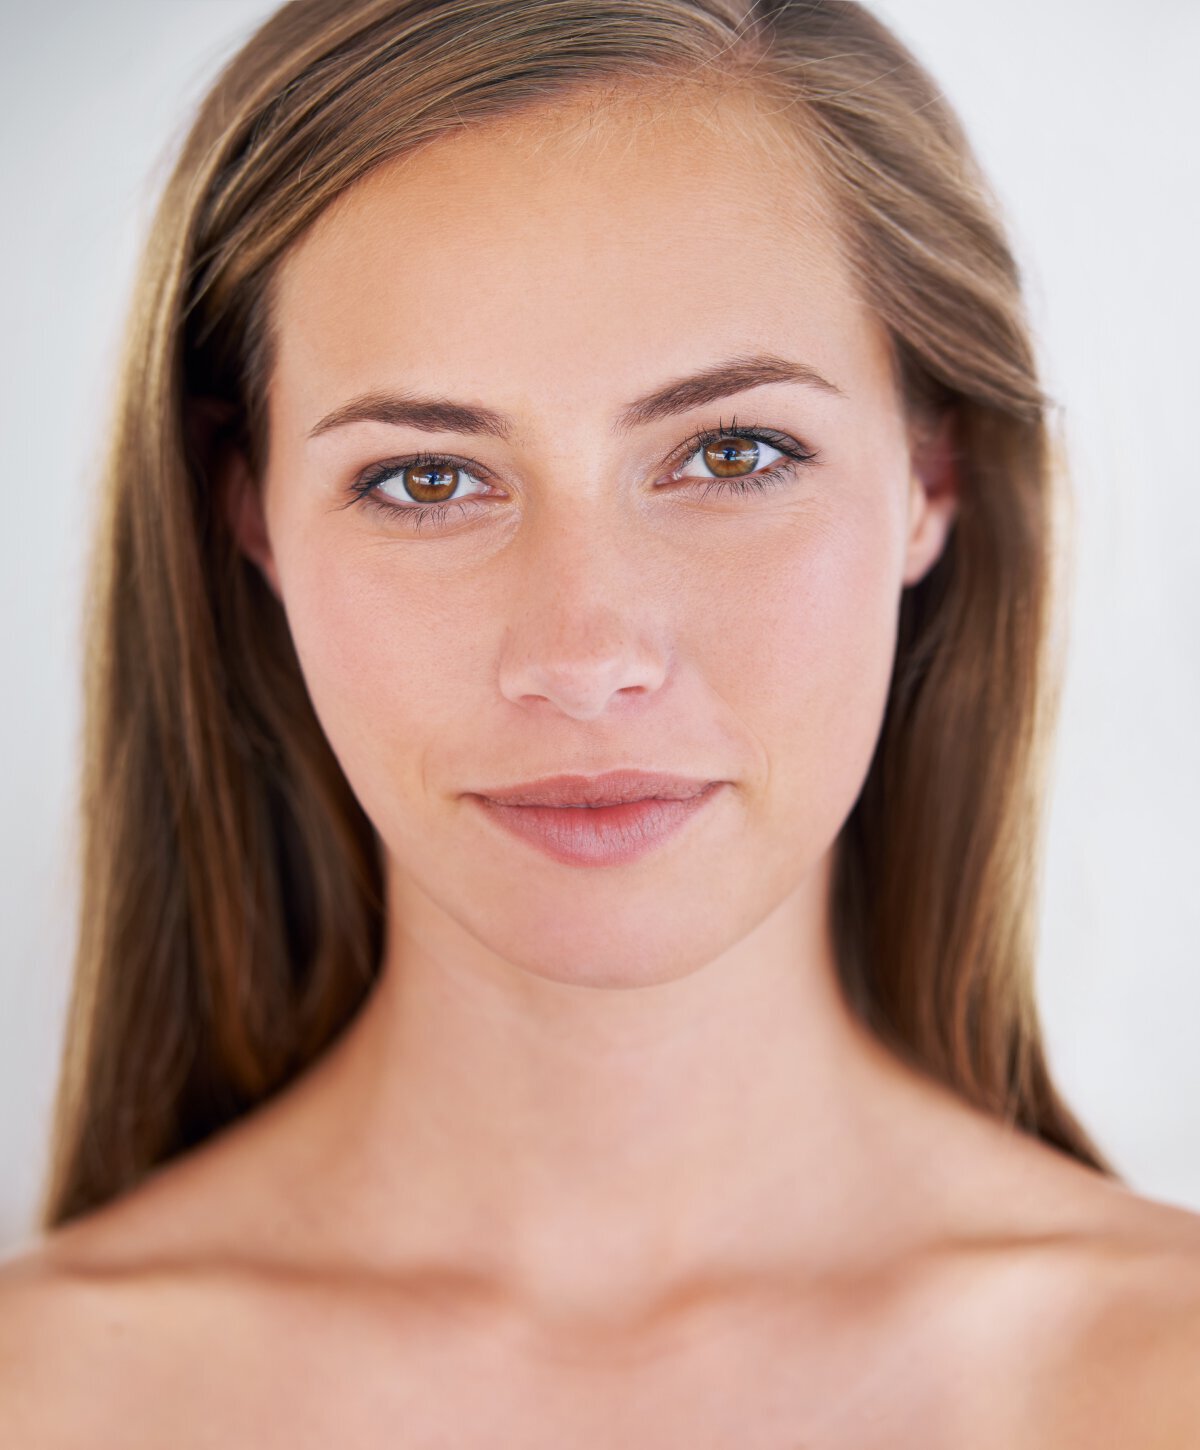 Ponte Vedra Beach Laser Acne Treatment model with brown hair